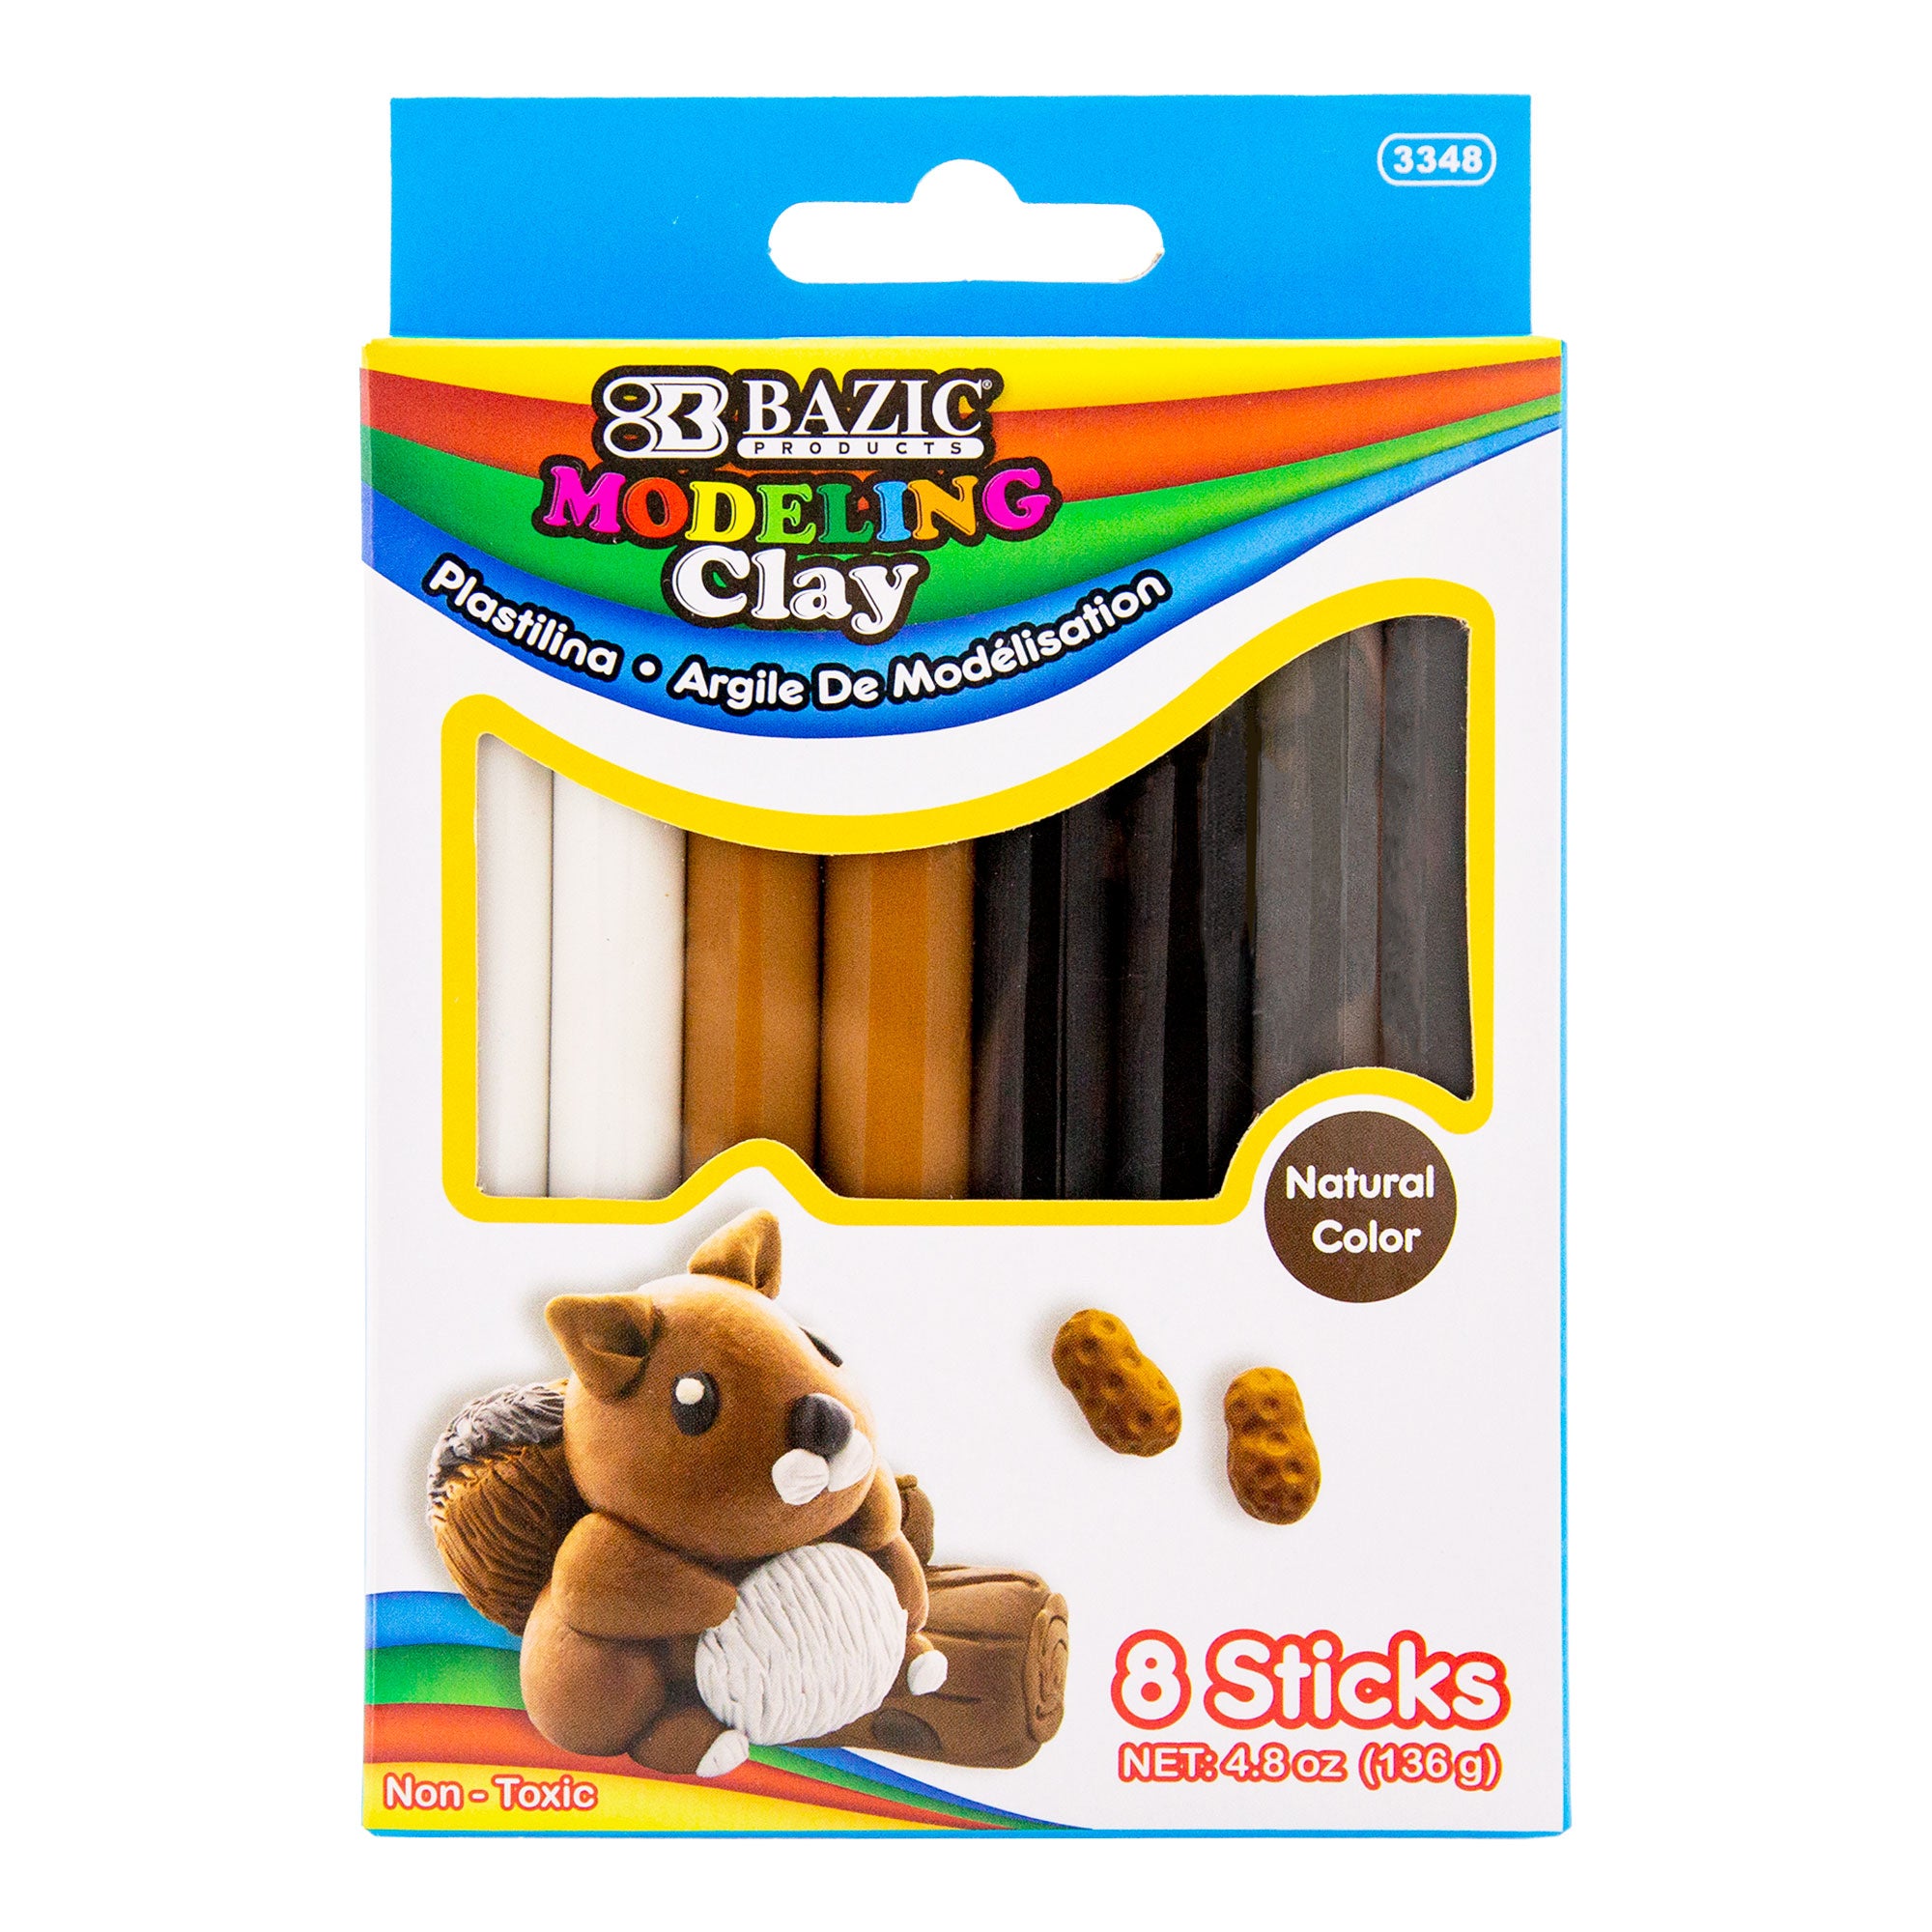 Bazic 4.8 oz 4 Natural & Earth Color Modeling Clay Sticks | 3348